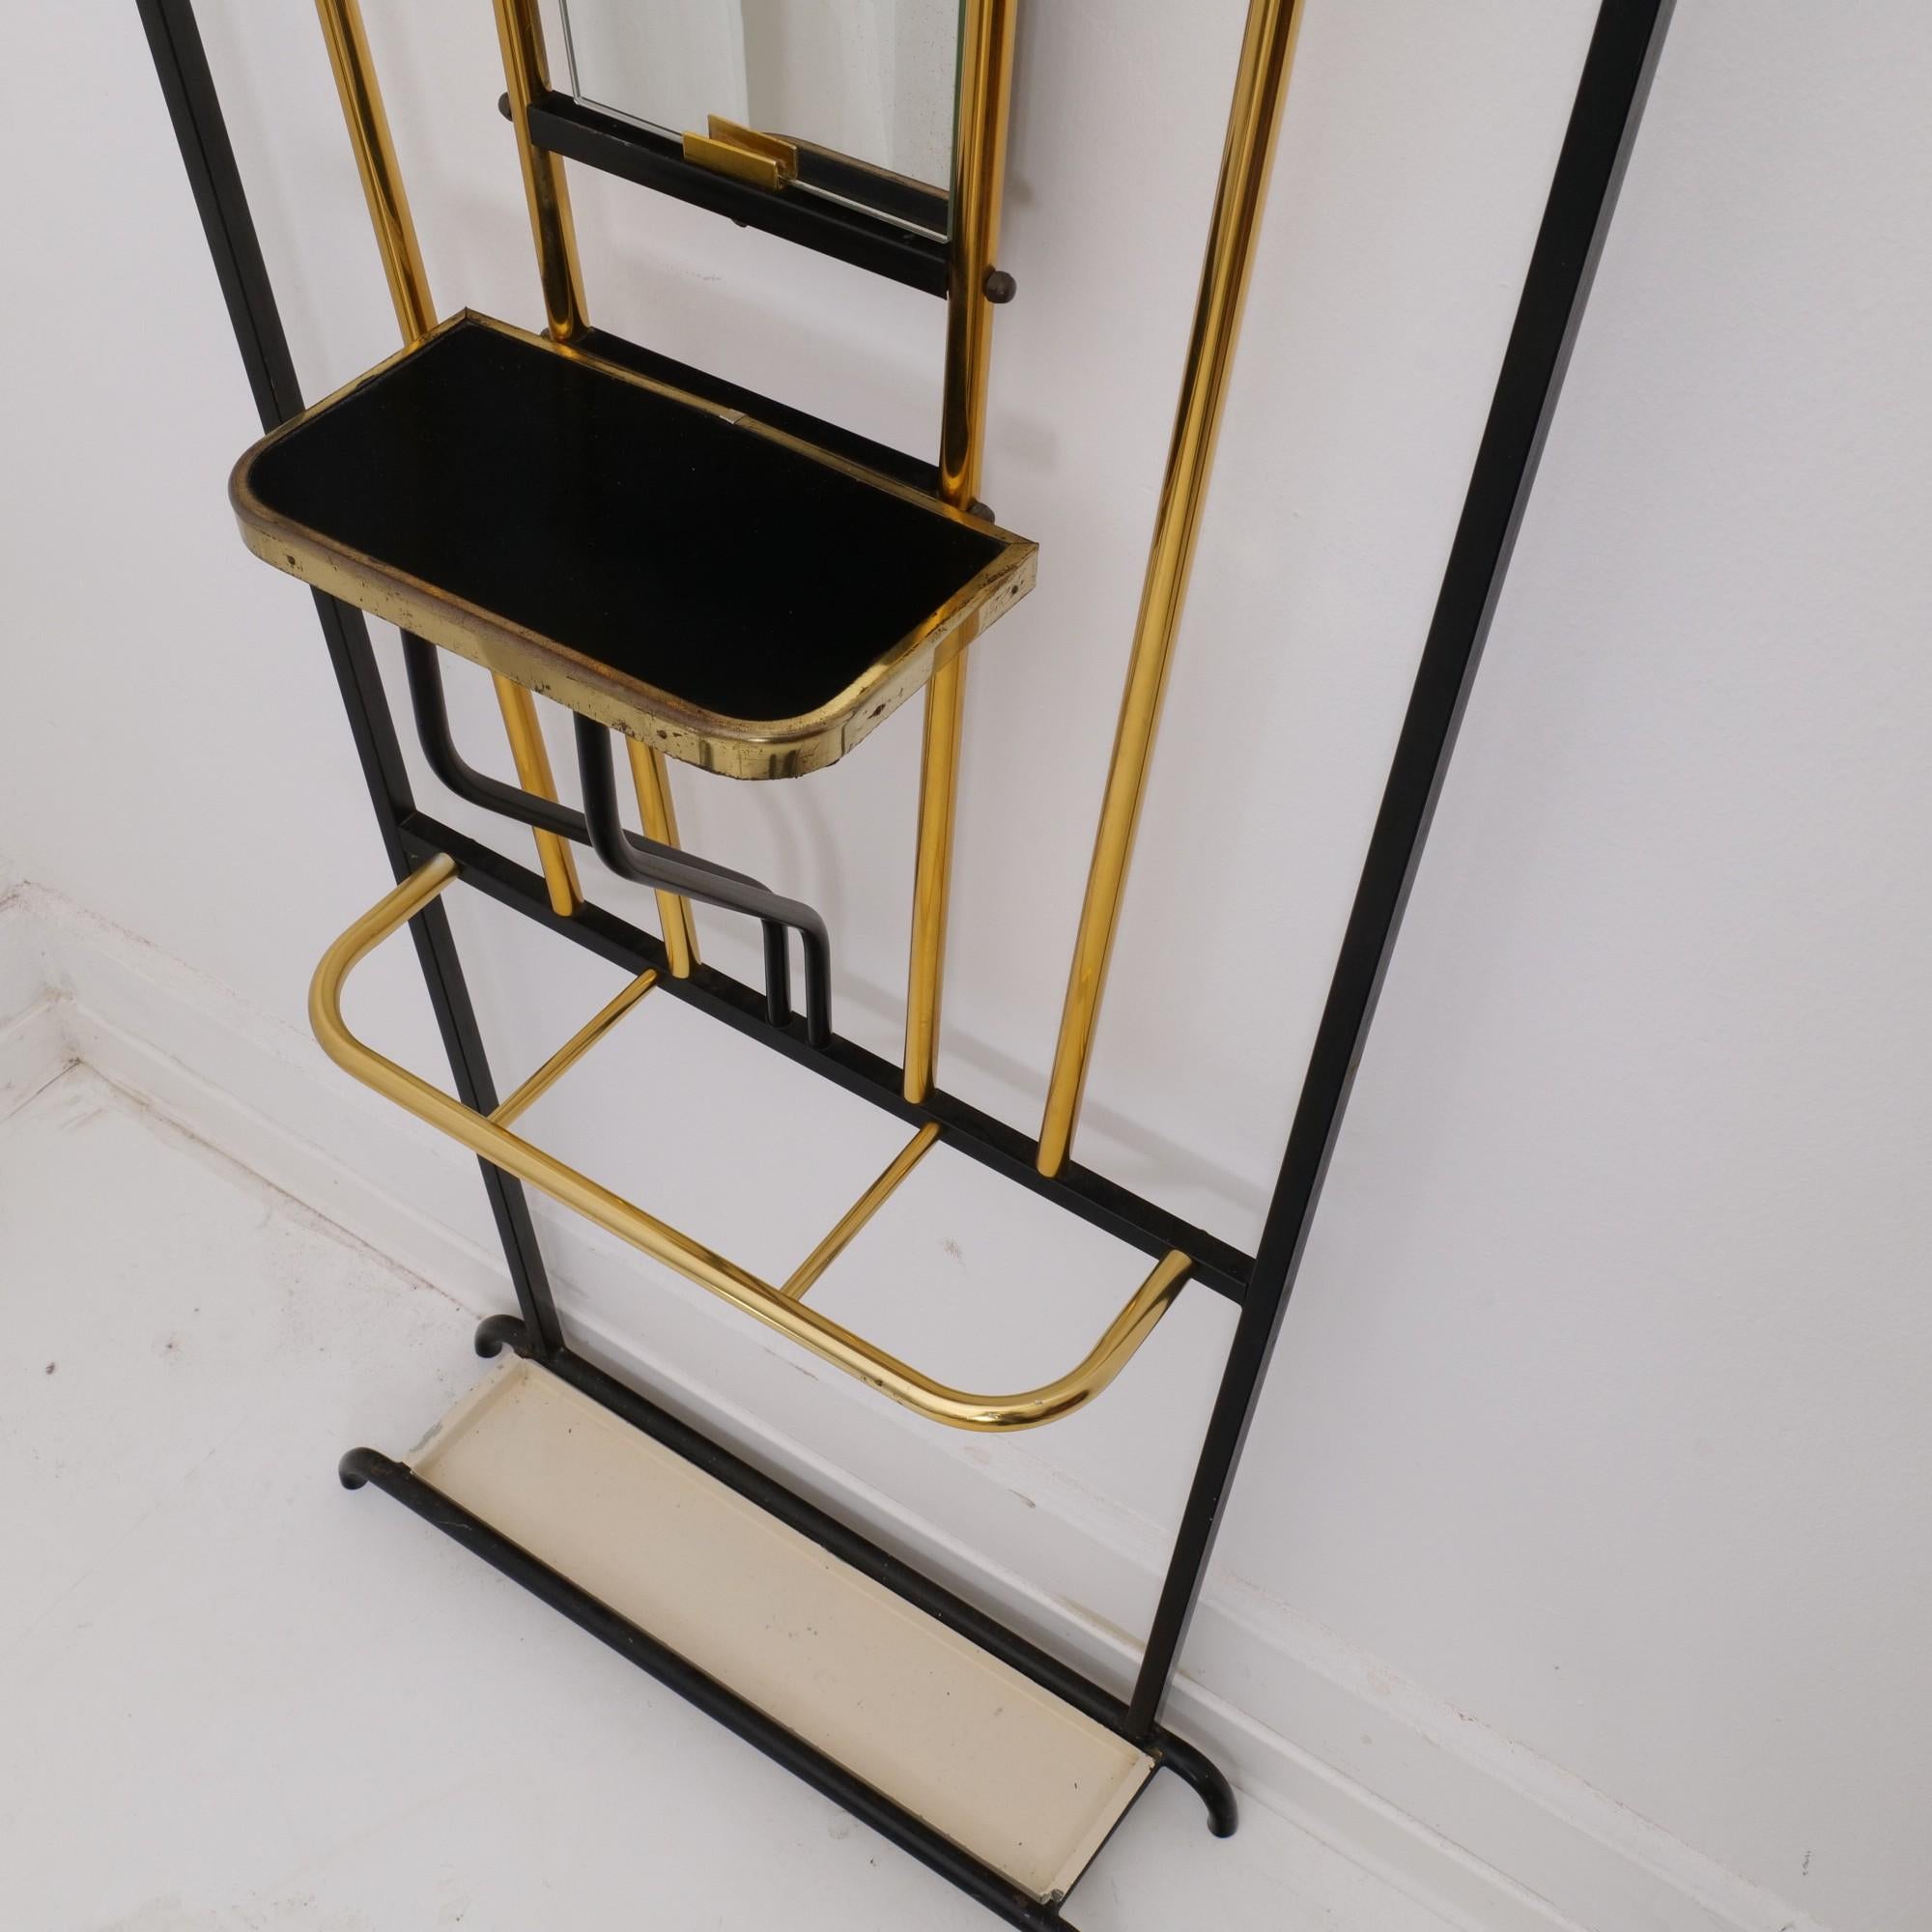 Mid-20th Century French Art Deco Wardrobe Coat Rack and Umbrella Stand with Mirror